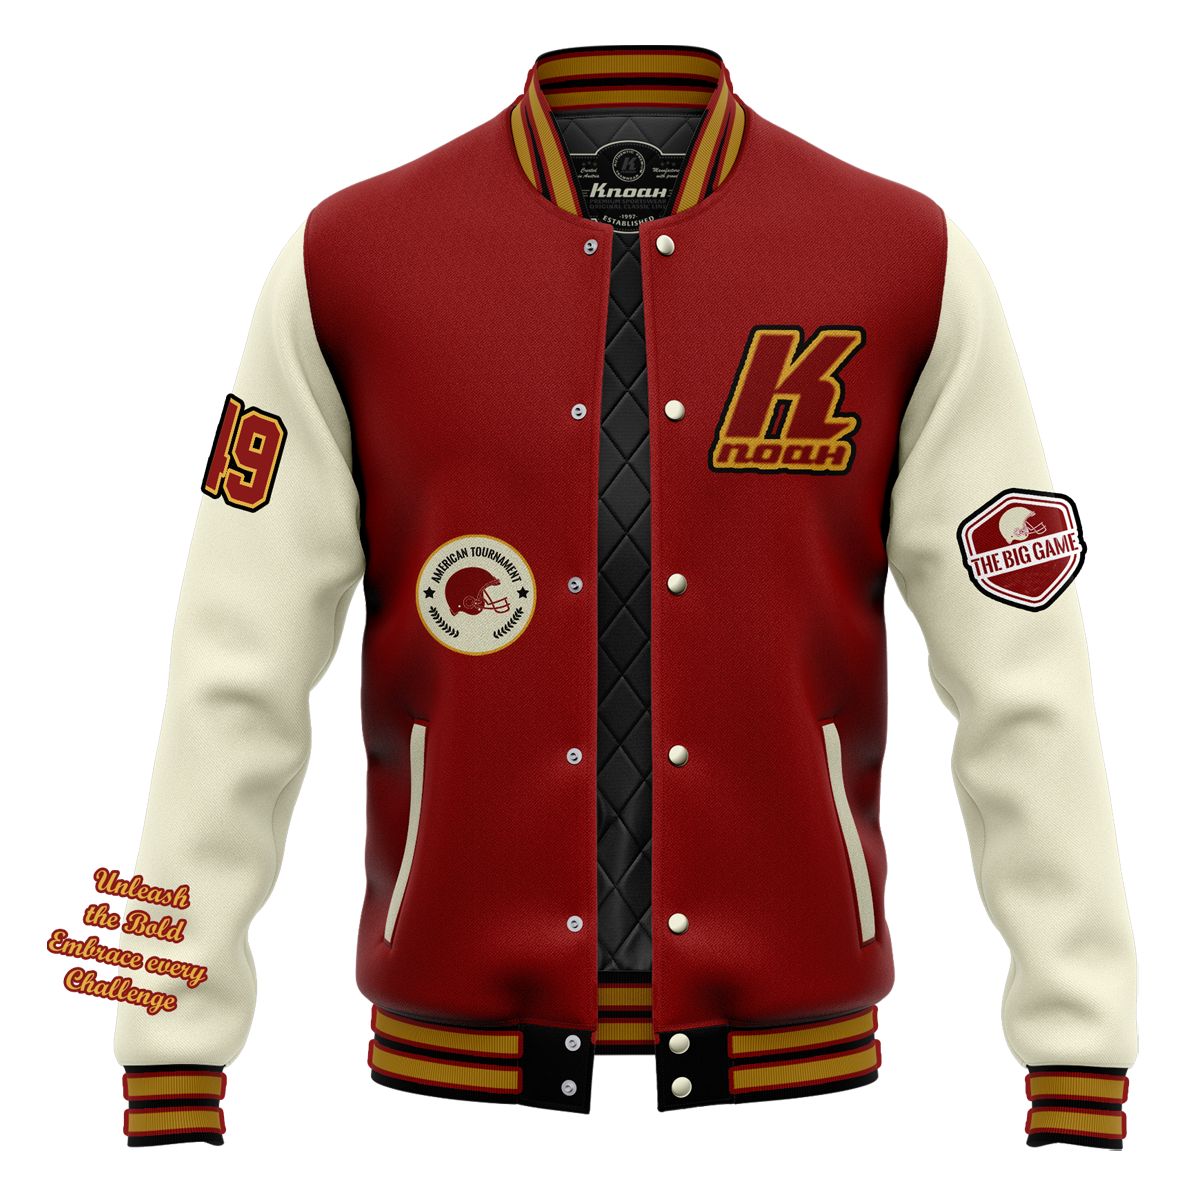 Day 9: "The big Game" Authentic Varsity Jacket with Playernumber/Initials